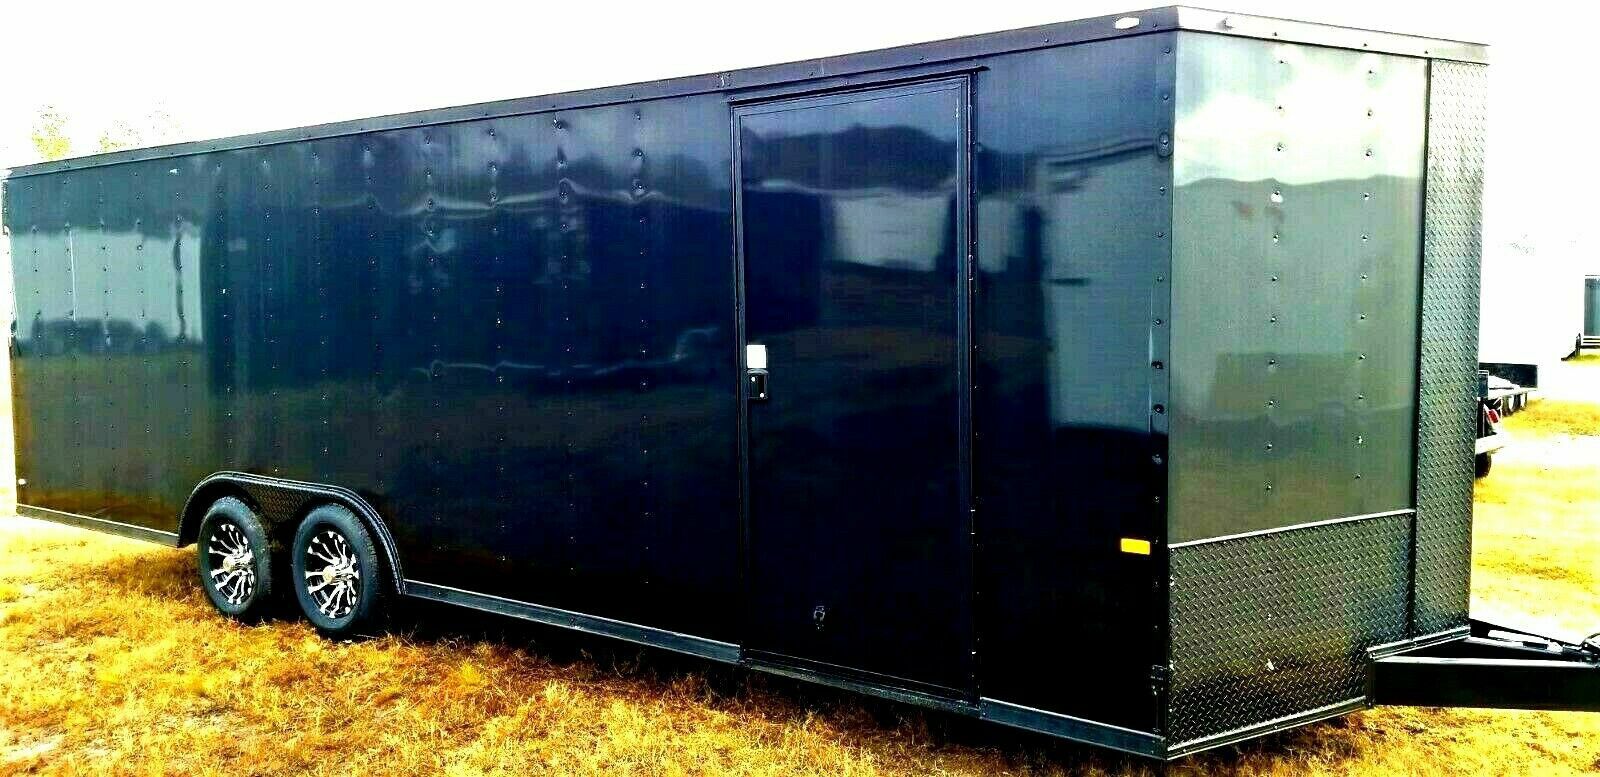 ENCLOSED TRAILERS ALL SIZES-20 24 28 32 VNOSE-SNOWMOBILE CAR HAULER STORAGE MOVING MOTORCYCLE ATV UTV QUAD SIDE BY SIDE